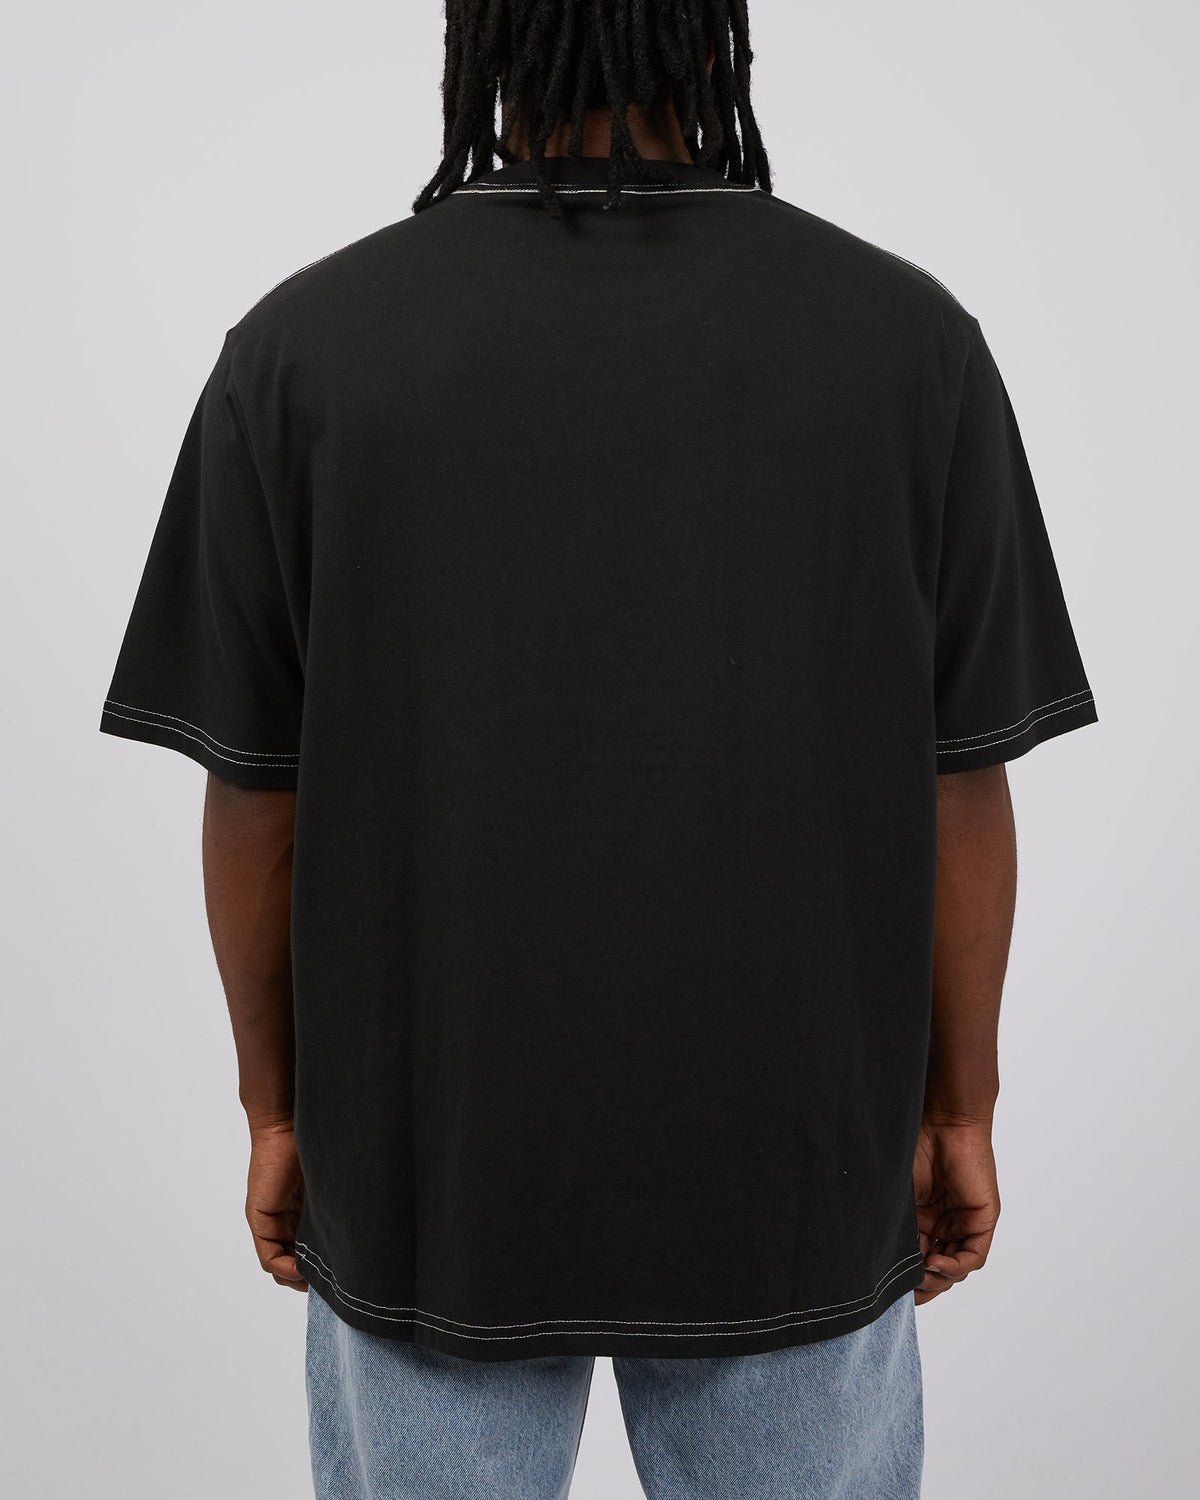 Lee-Twitch Baggy Tee Black Contrast-Edge Clothing